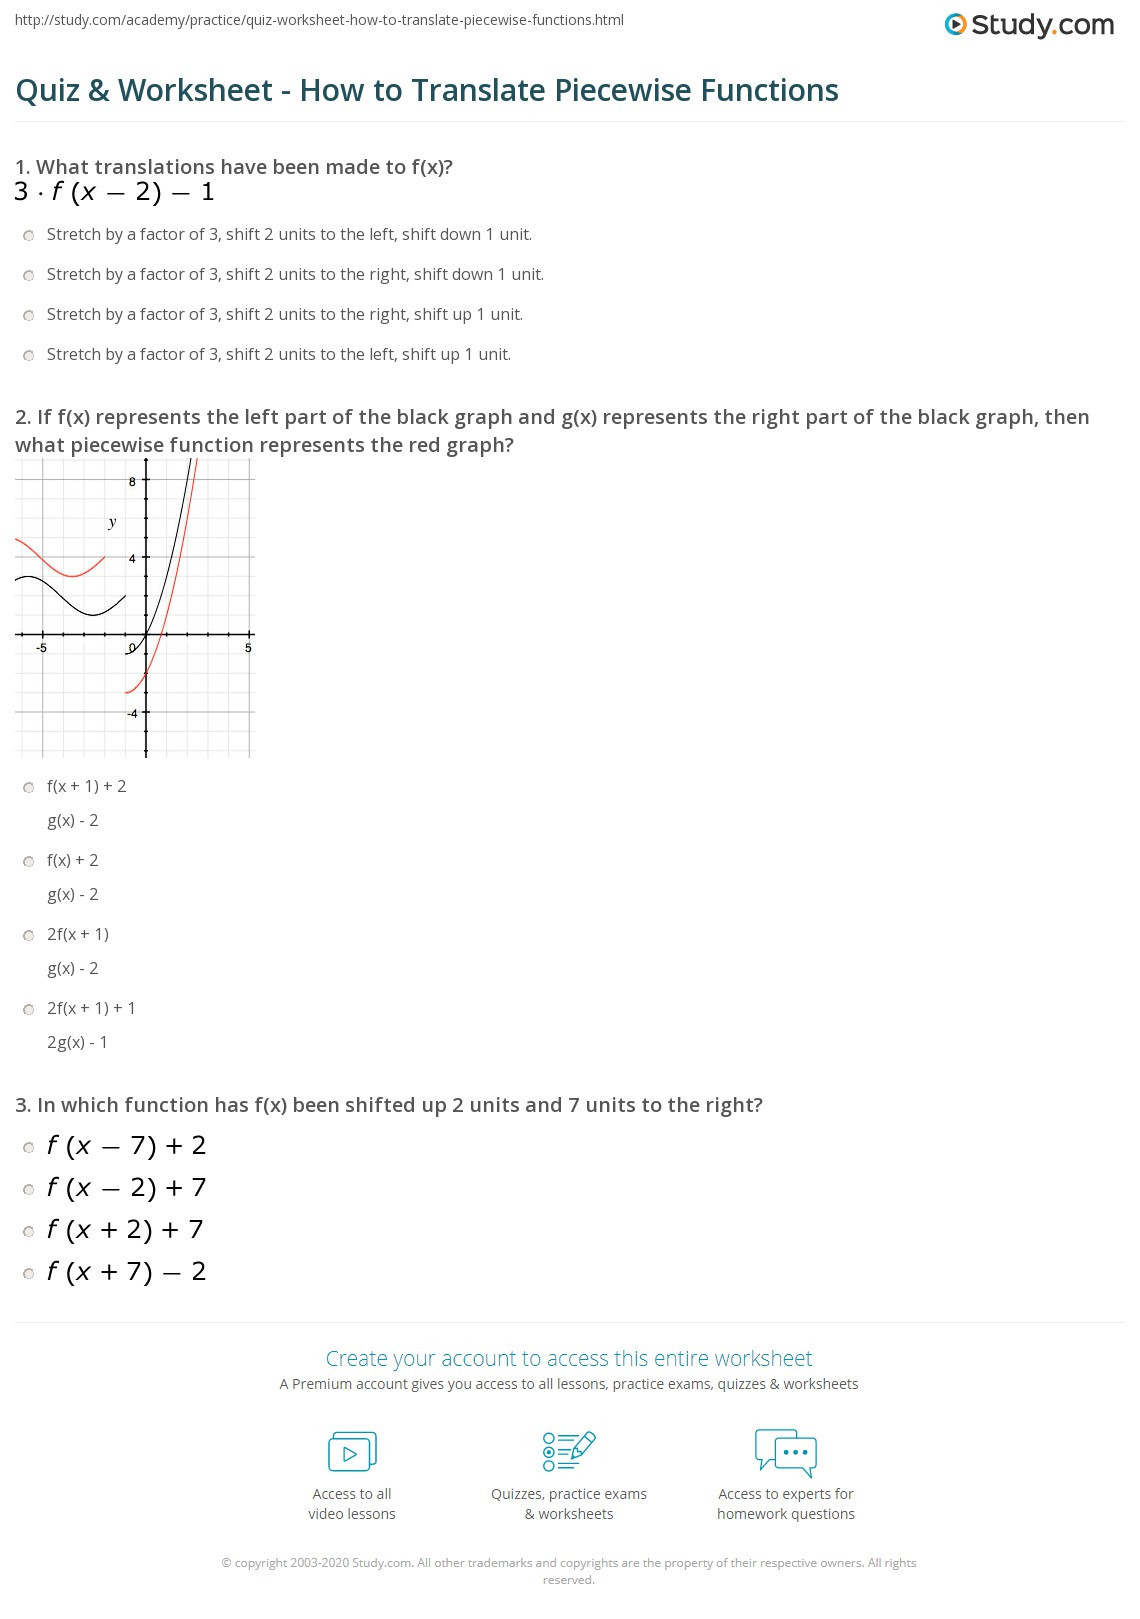 Composite Function Worksheet Answers Quiz &amp; Worksheet How to Translate Piecewise Functions